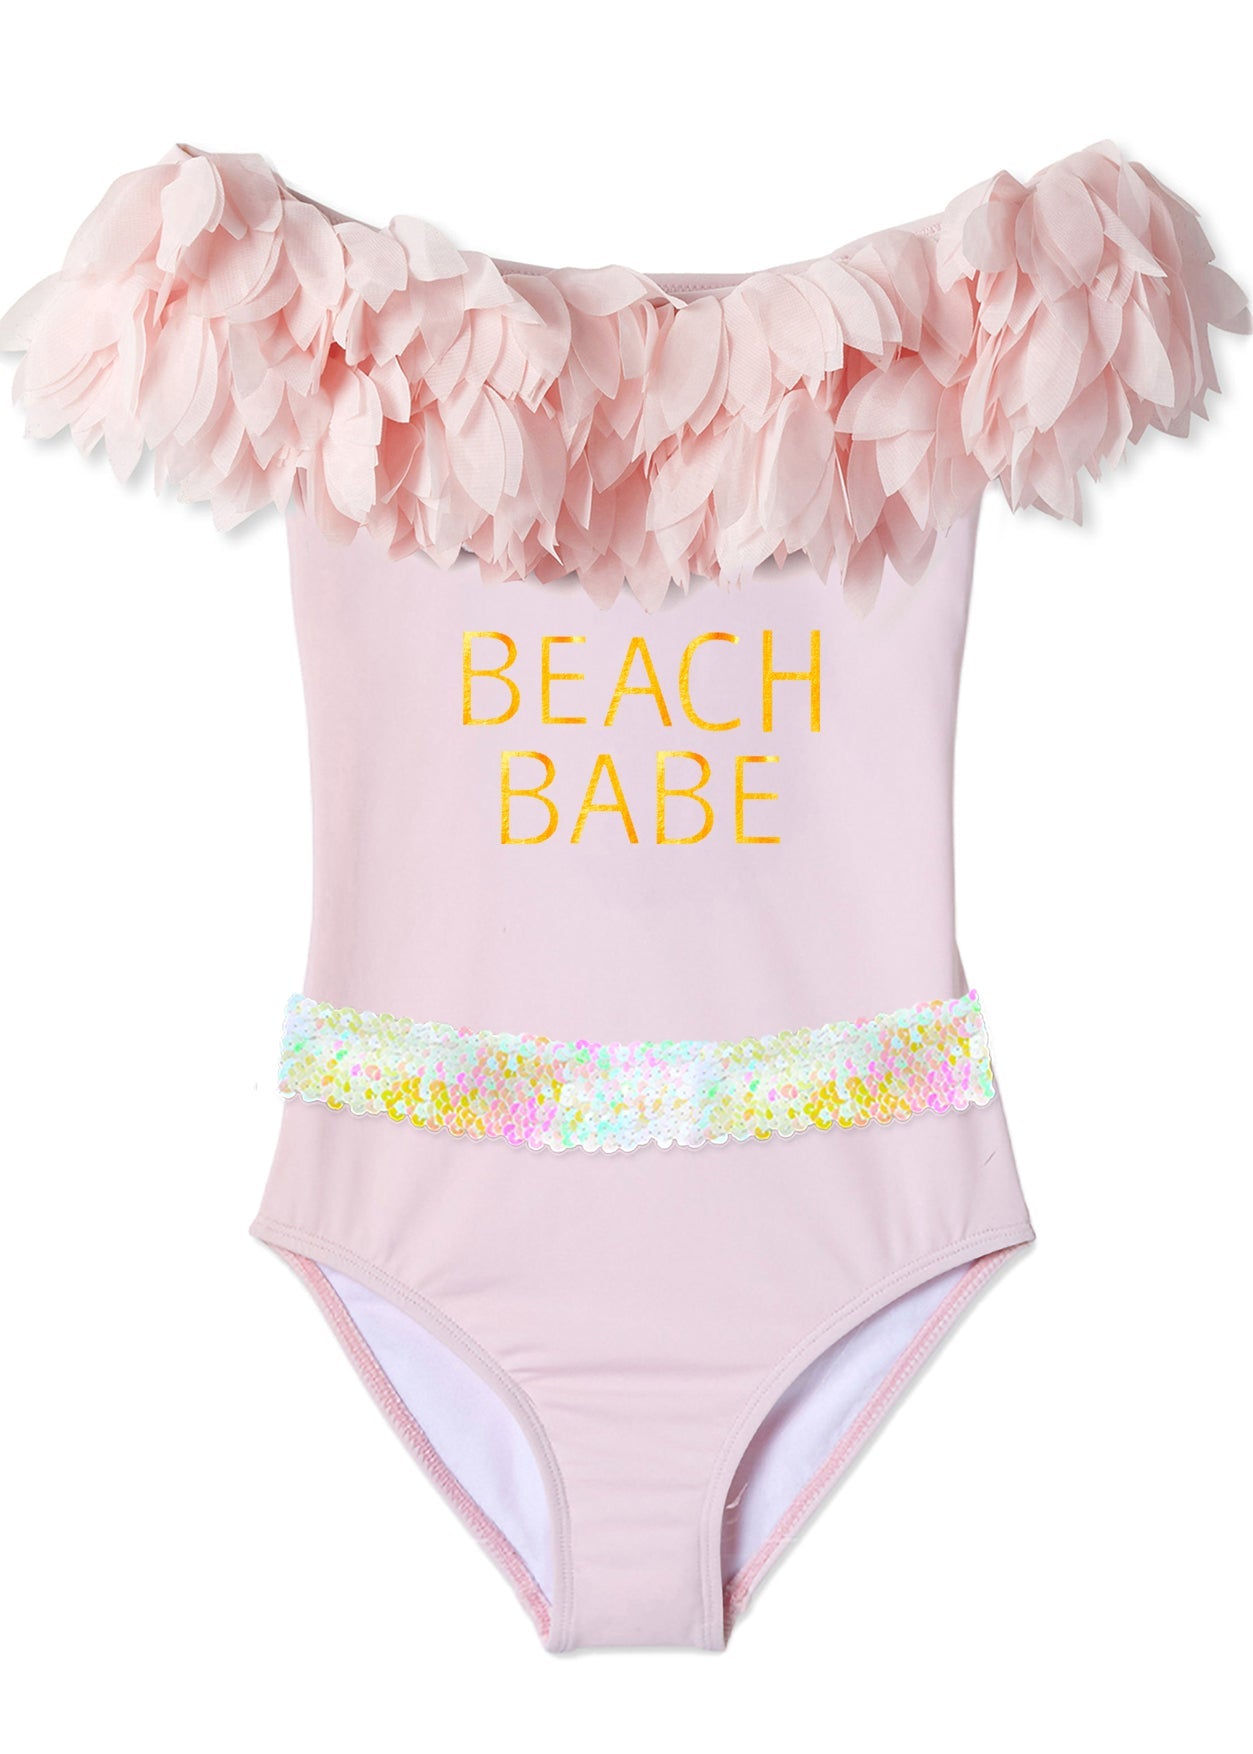 Beach Babe Pink Swimsuit With Petals & Sequin Belt